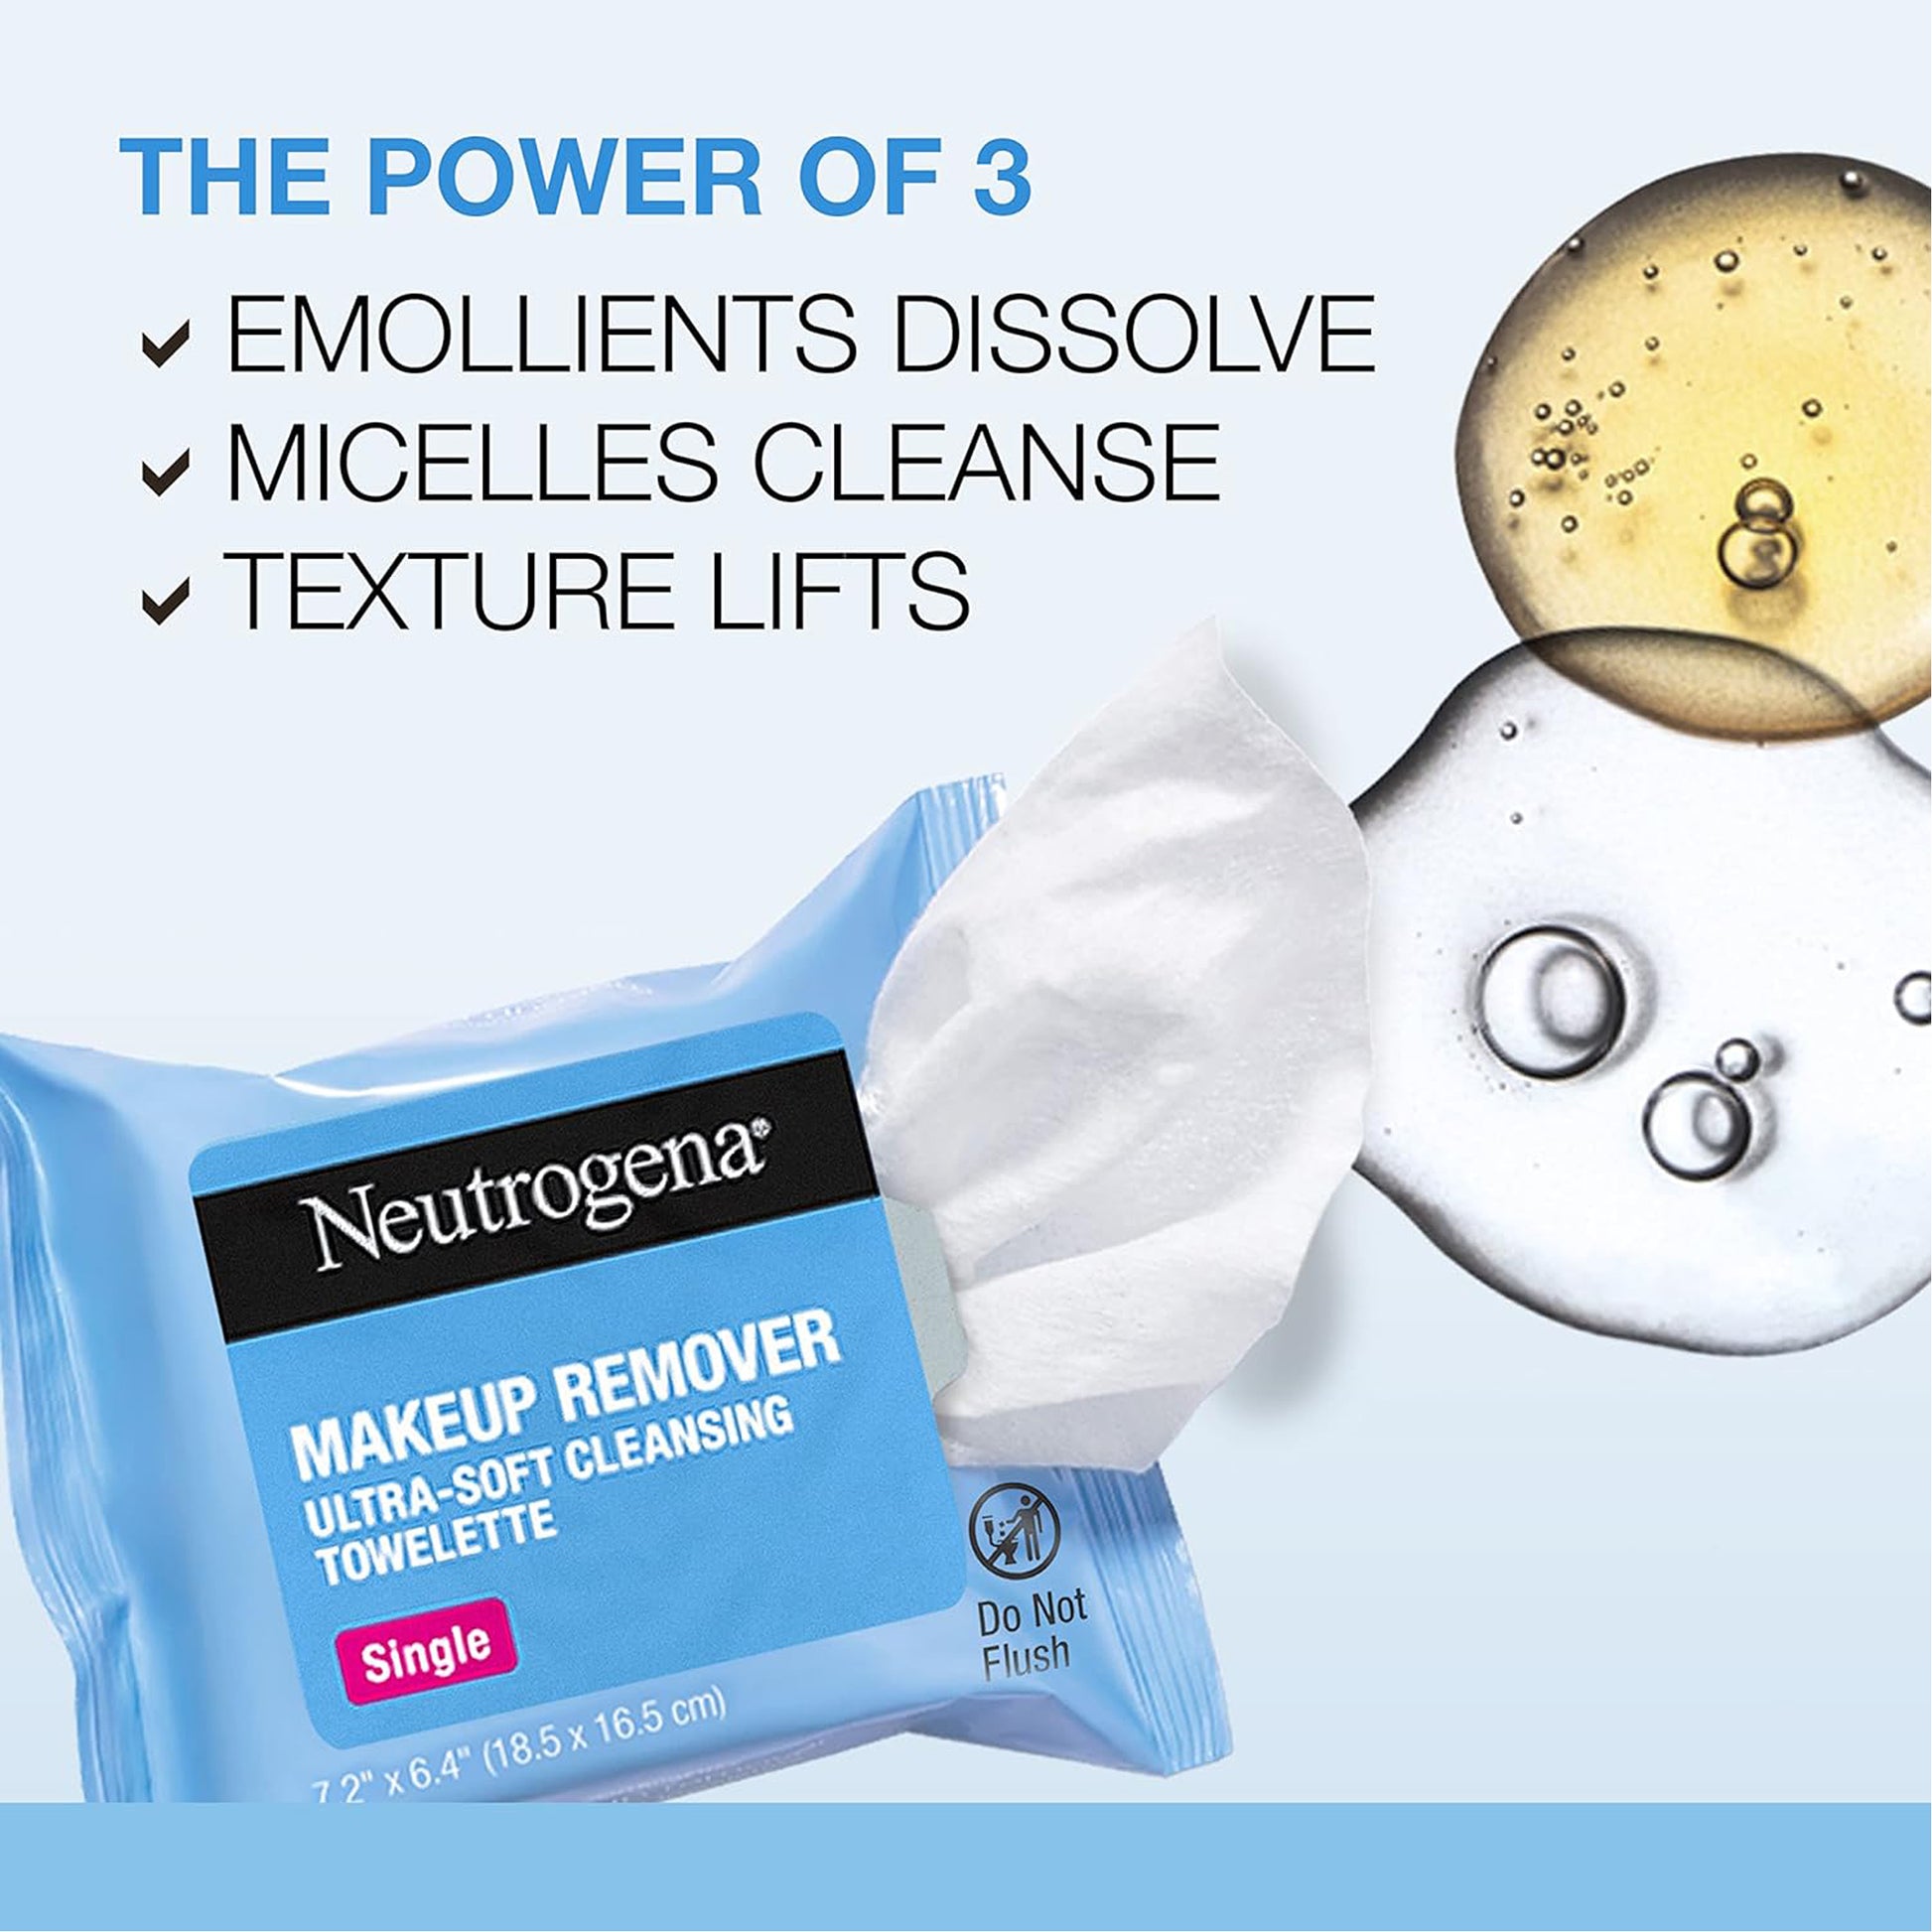 Neutrogena Makeup Remover Ultra-Soft Cleansing Towelettes 20 Ct